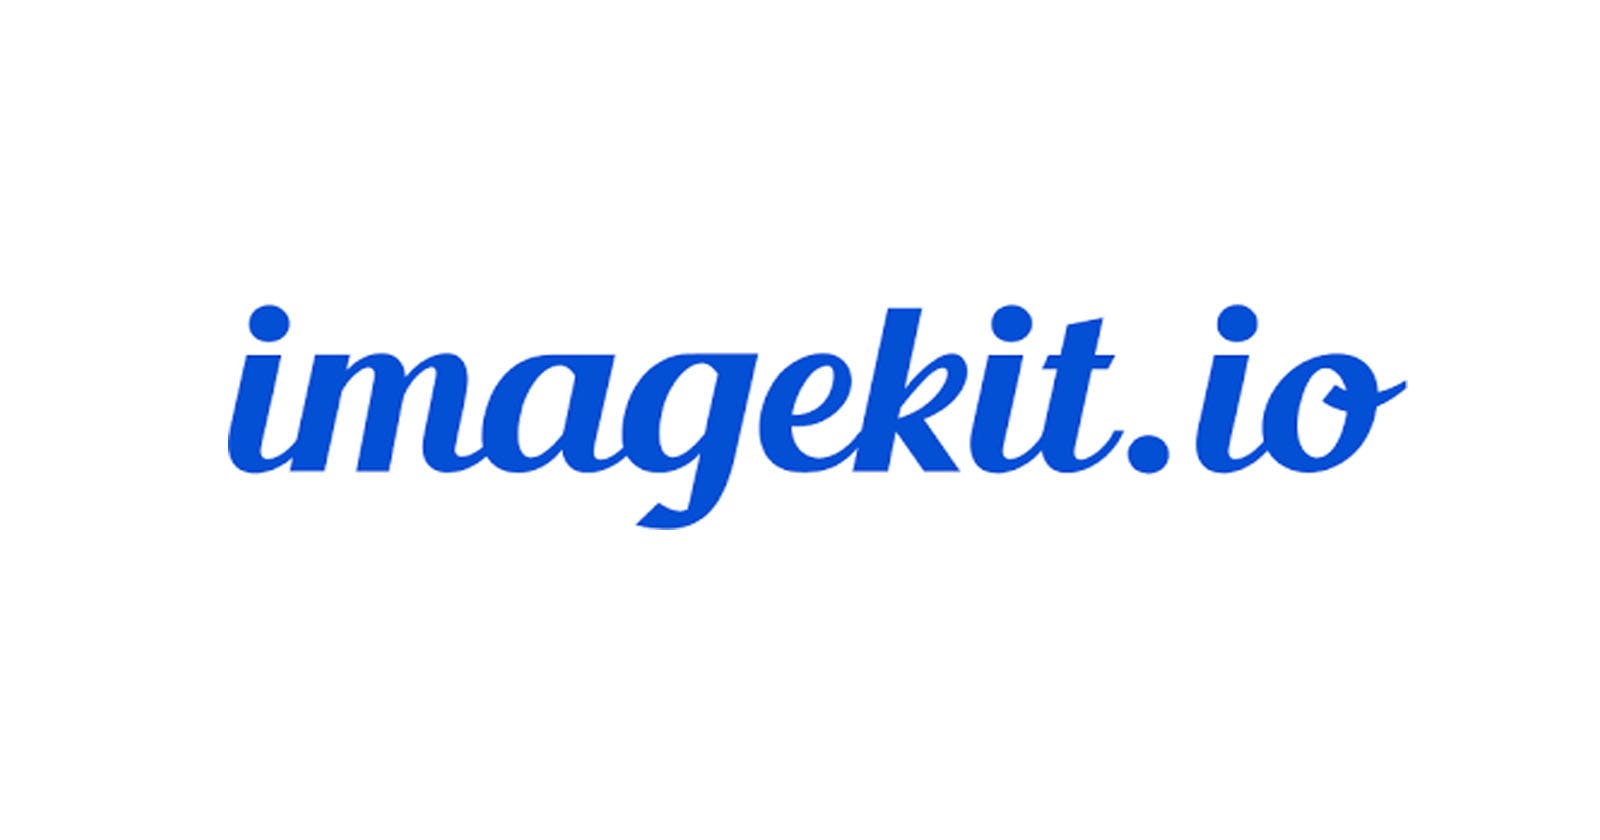 Found an image manager and image web delivery tool : ImageKit.io